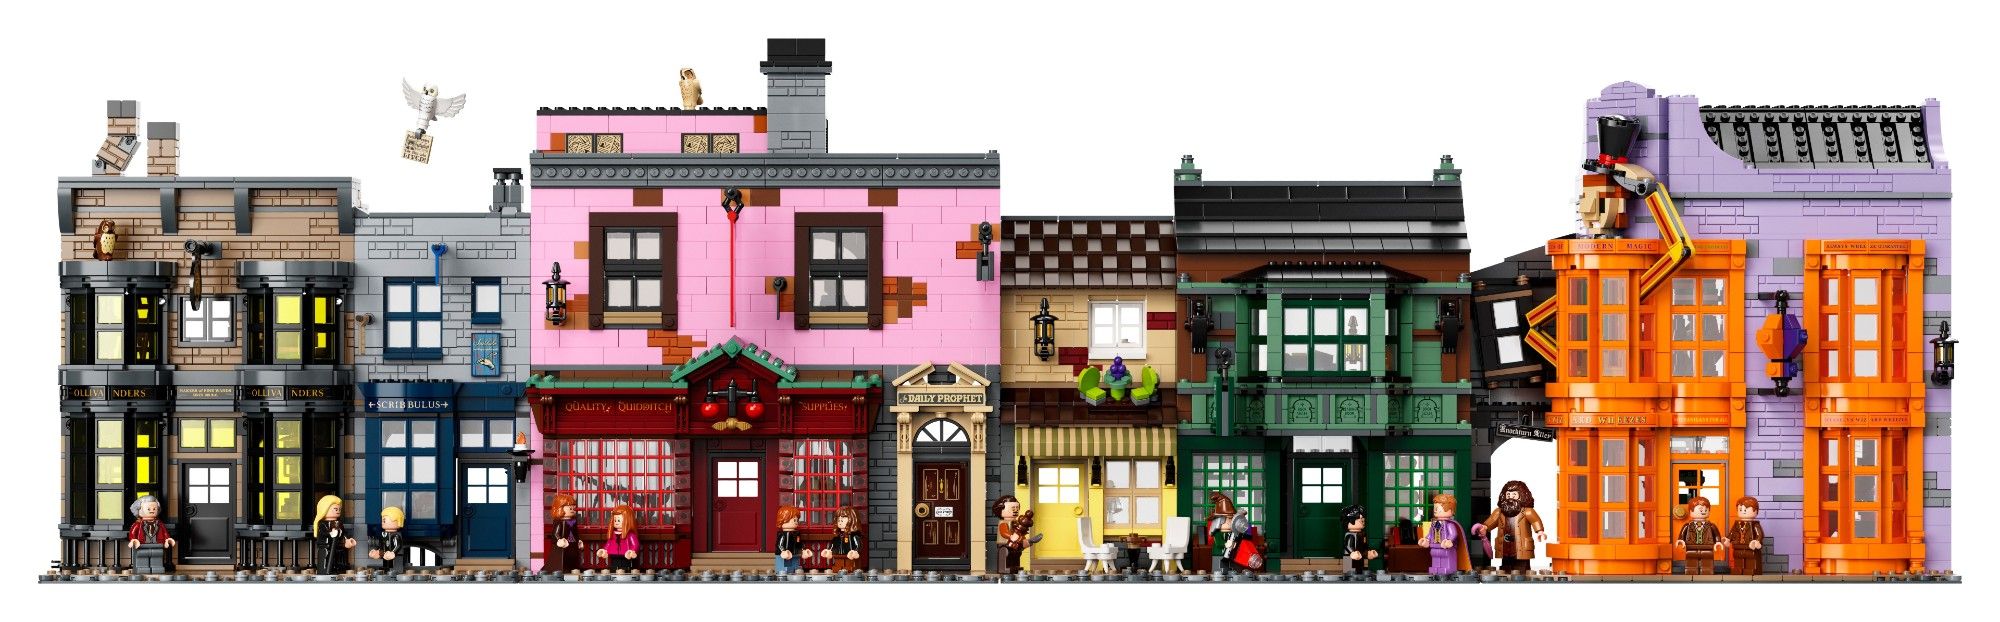 Massive Harry Potter Diagon Alley LEGO Set Launches With 16 Minifigures